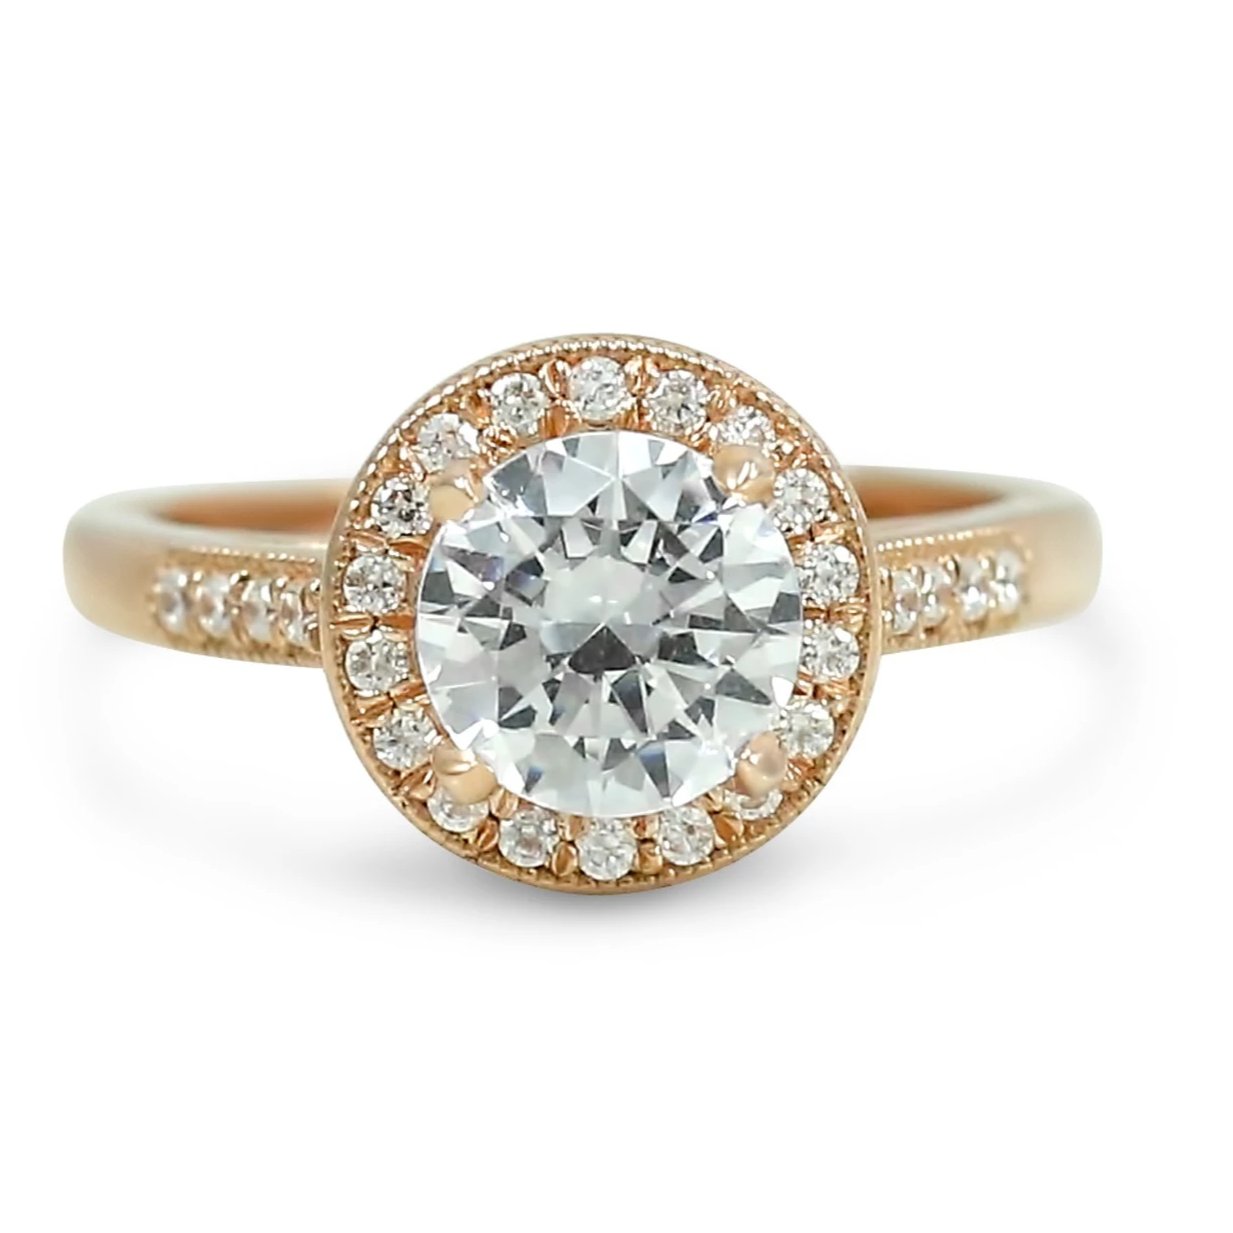 ready to ship diamond engagement ring with a matching milgrain diamond halo, diamonds on the band and filigree details. various shapes and metals available